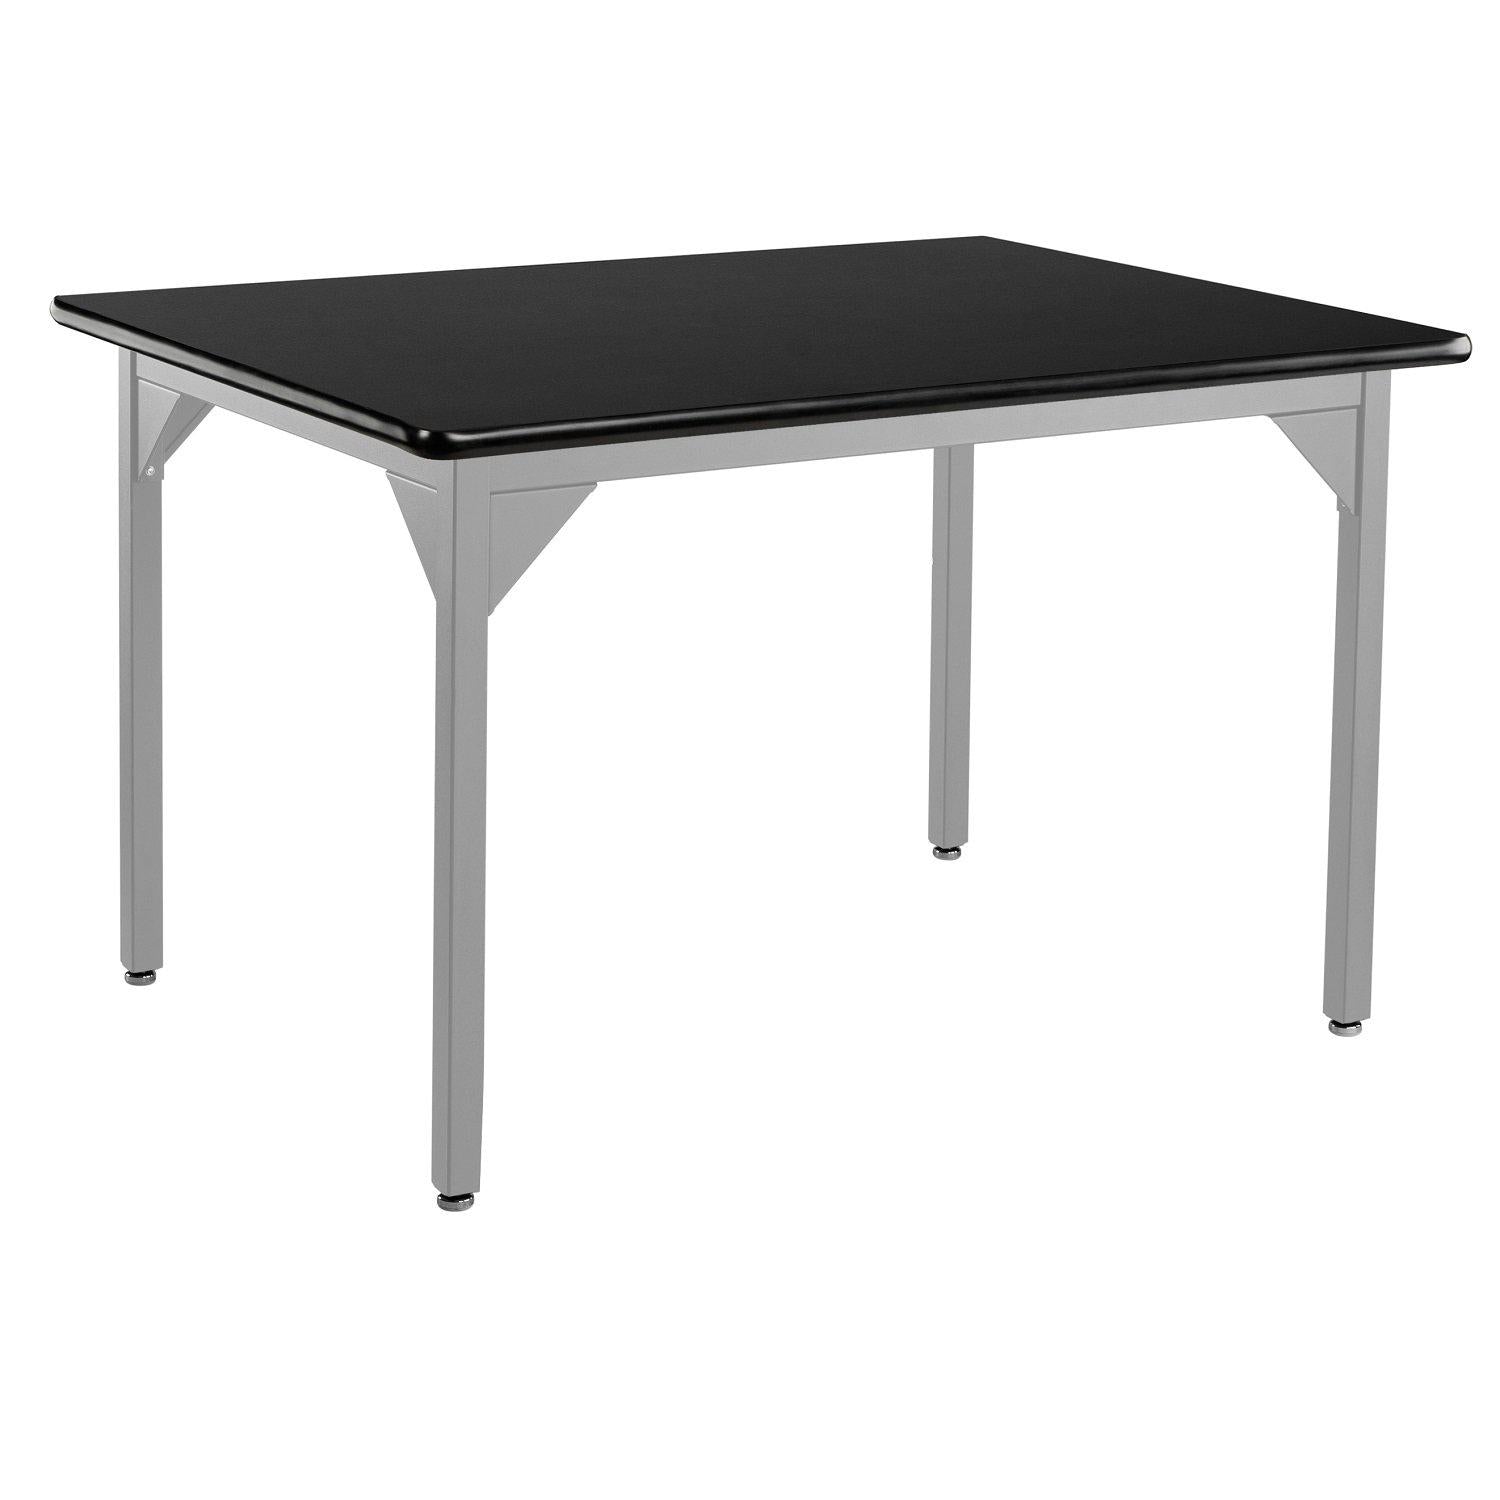 Heavy-Duty Fixed Height Utility Table, Soft Grey Frame, 36" x 42", High-Pressure Laminate Top with T-Mold Edge